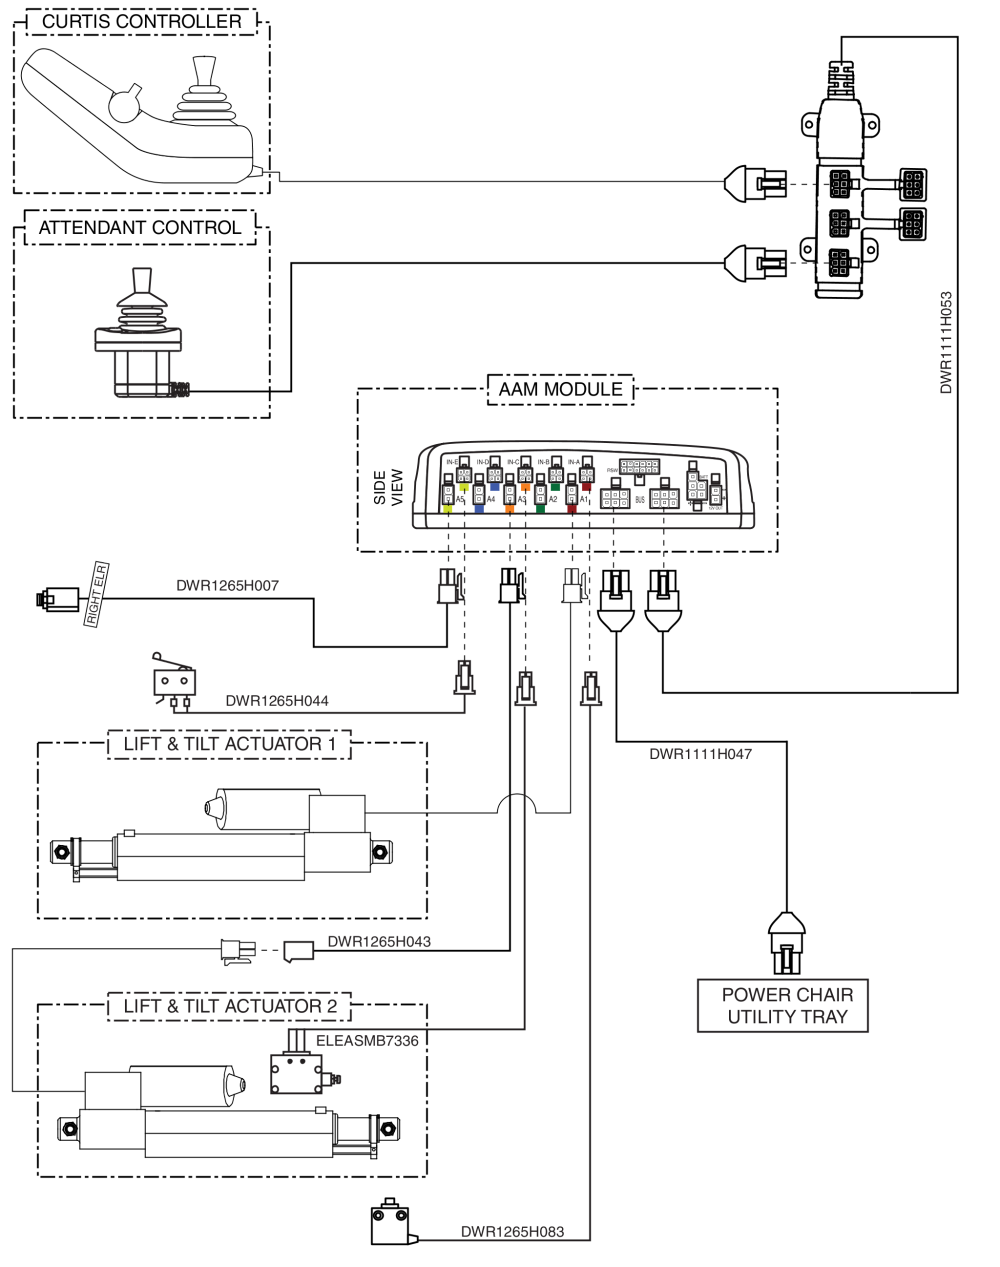 Tb2 Lift And Tilt W/ Afp And Attendant Control, Electrical System Diagram parts diagram